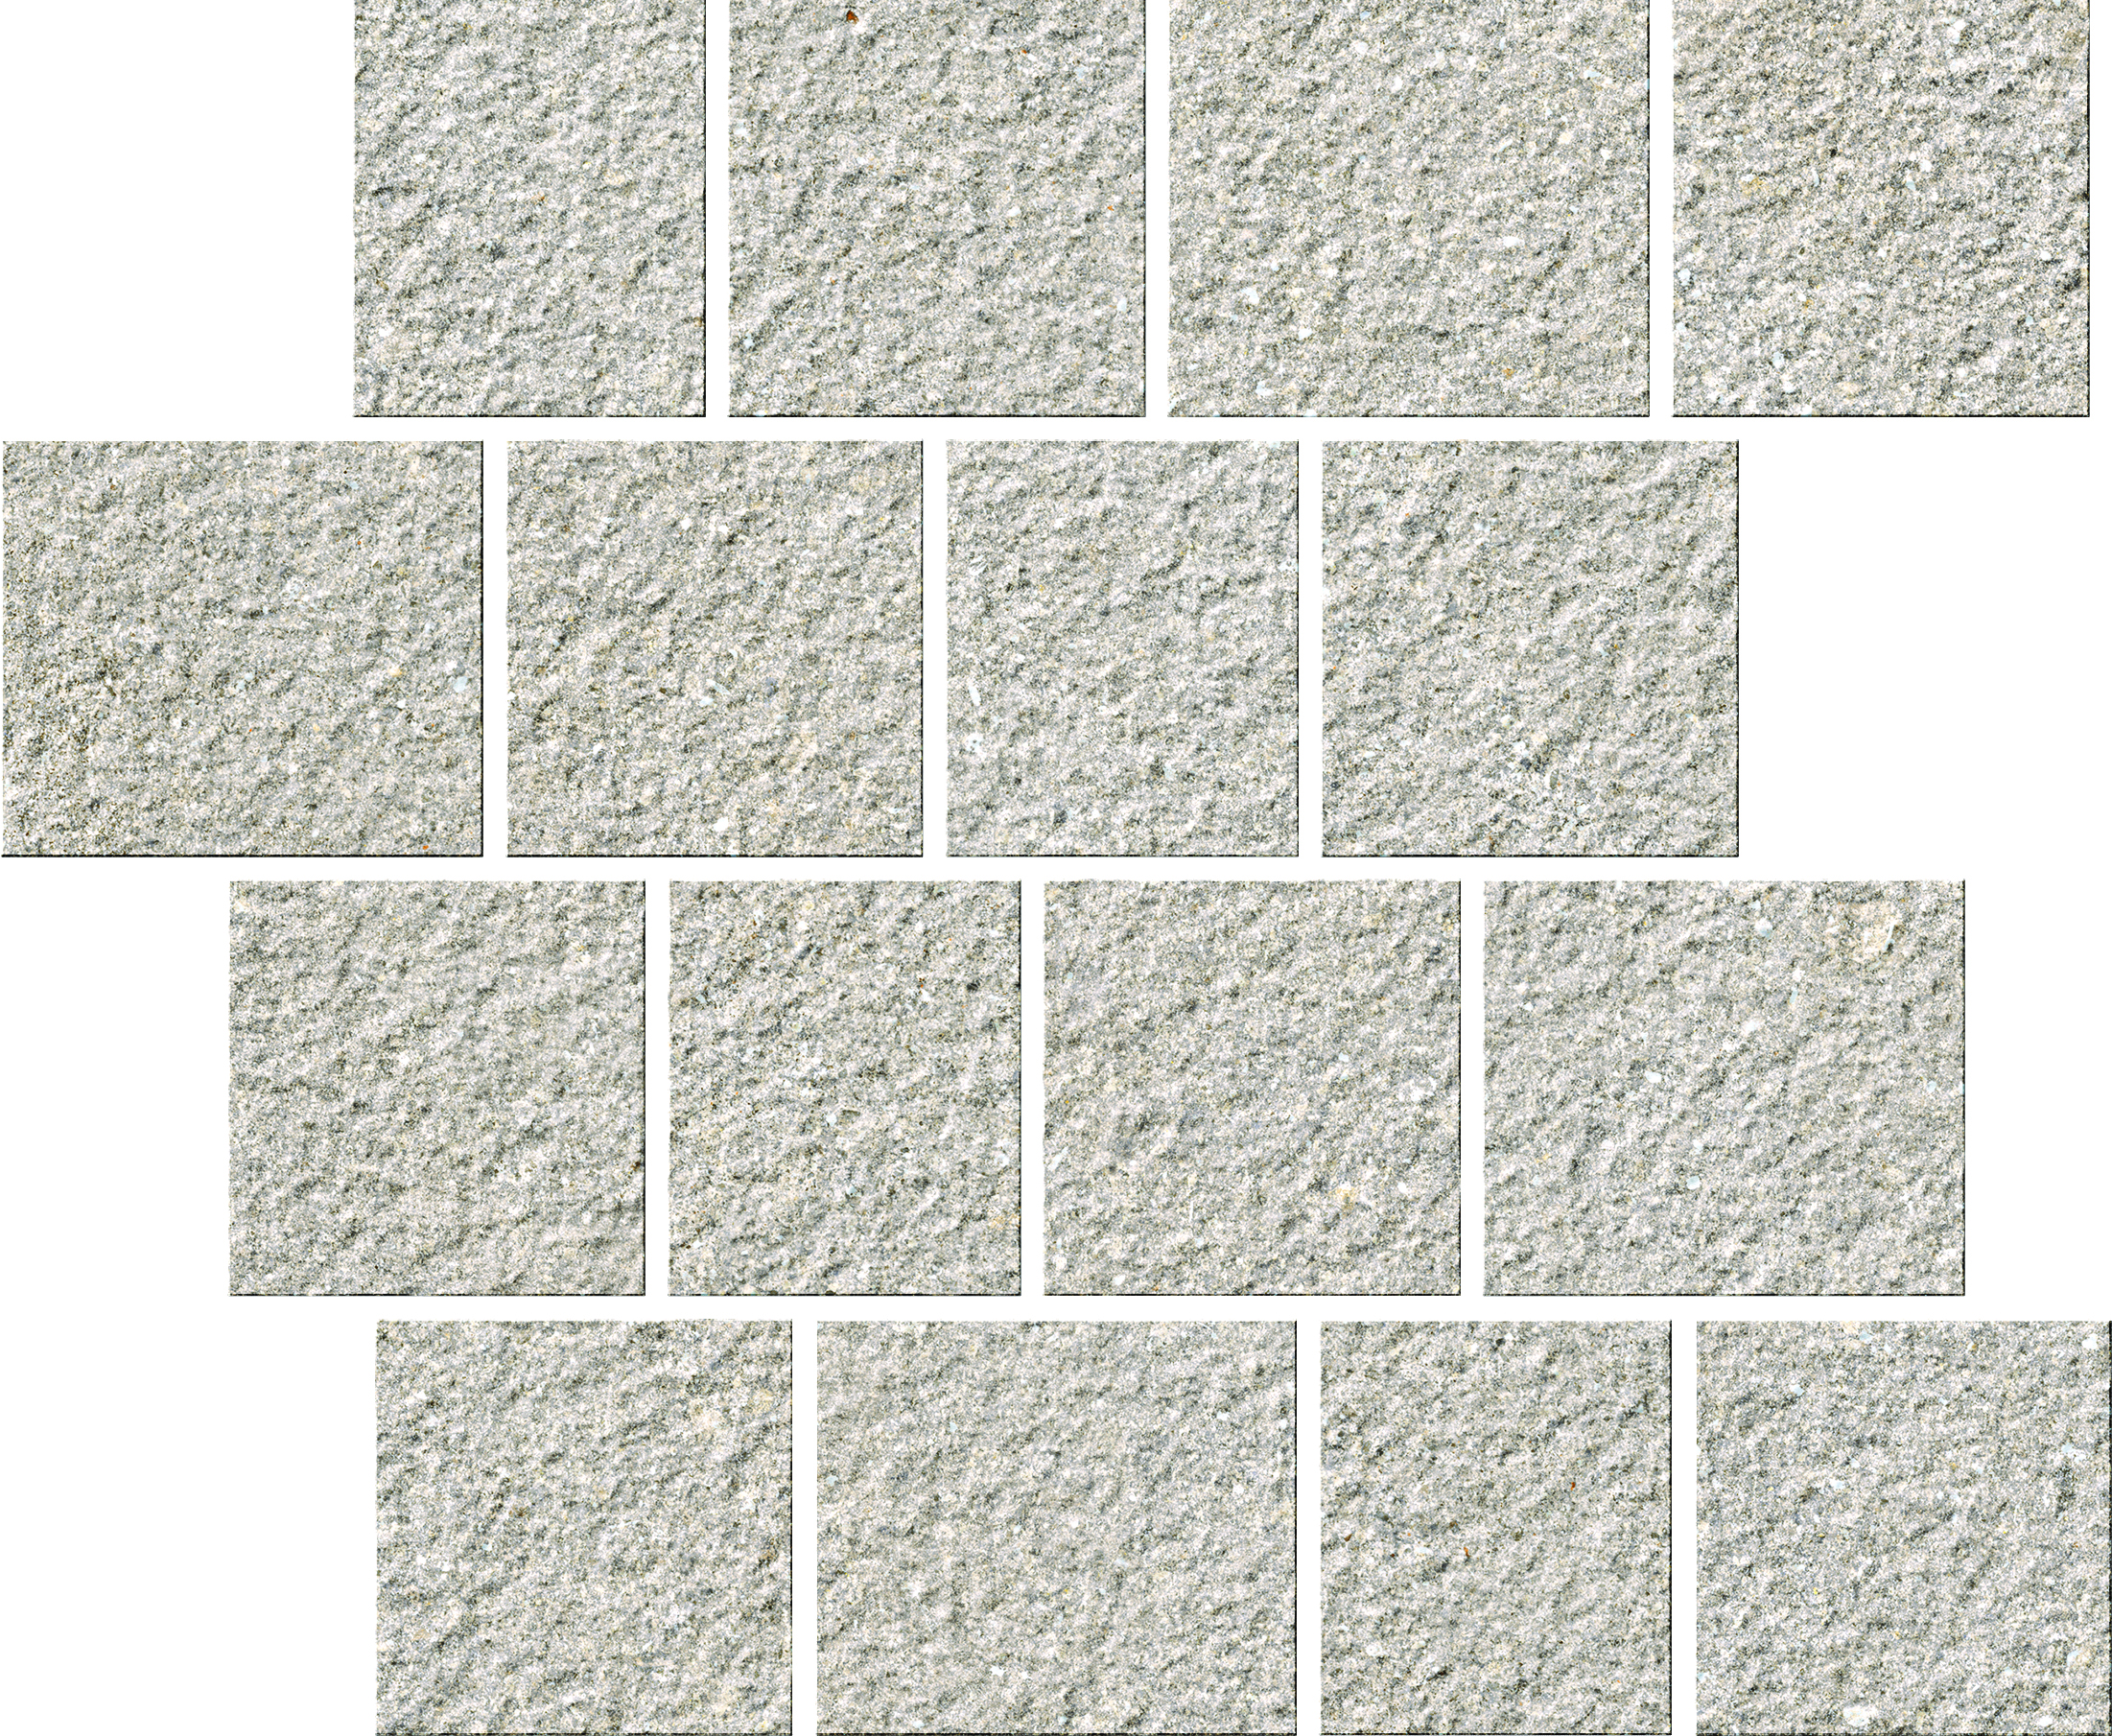 Serenissima Eclettica Argento Rock Mosaic Pave 1081798 30x30cm rectified 9,5mm